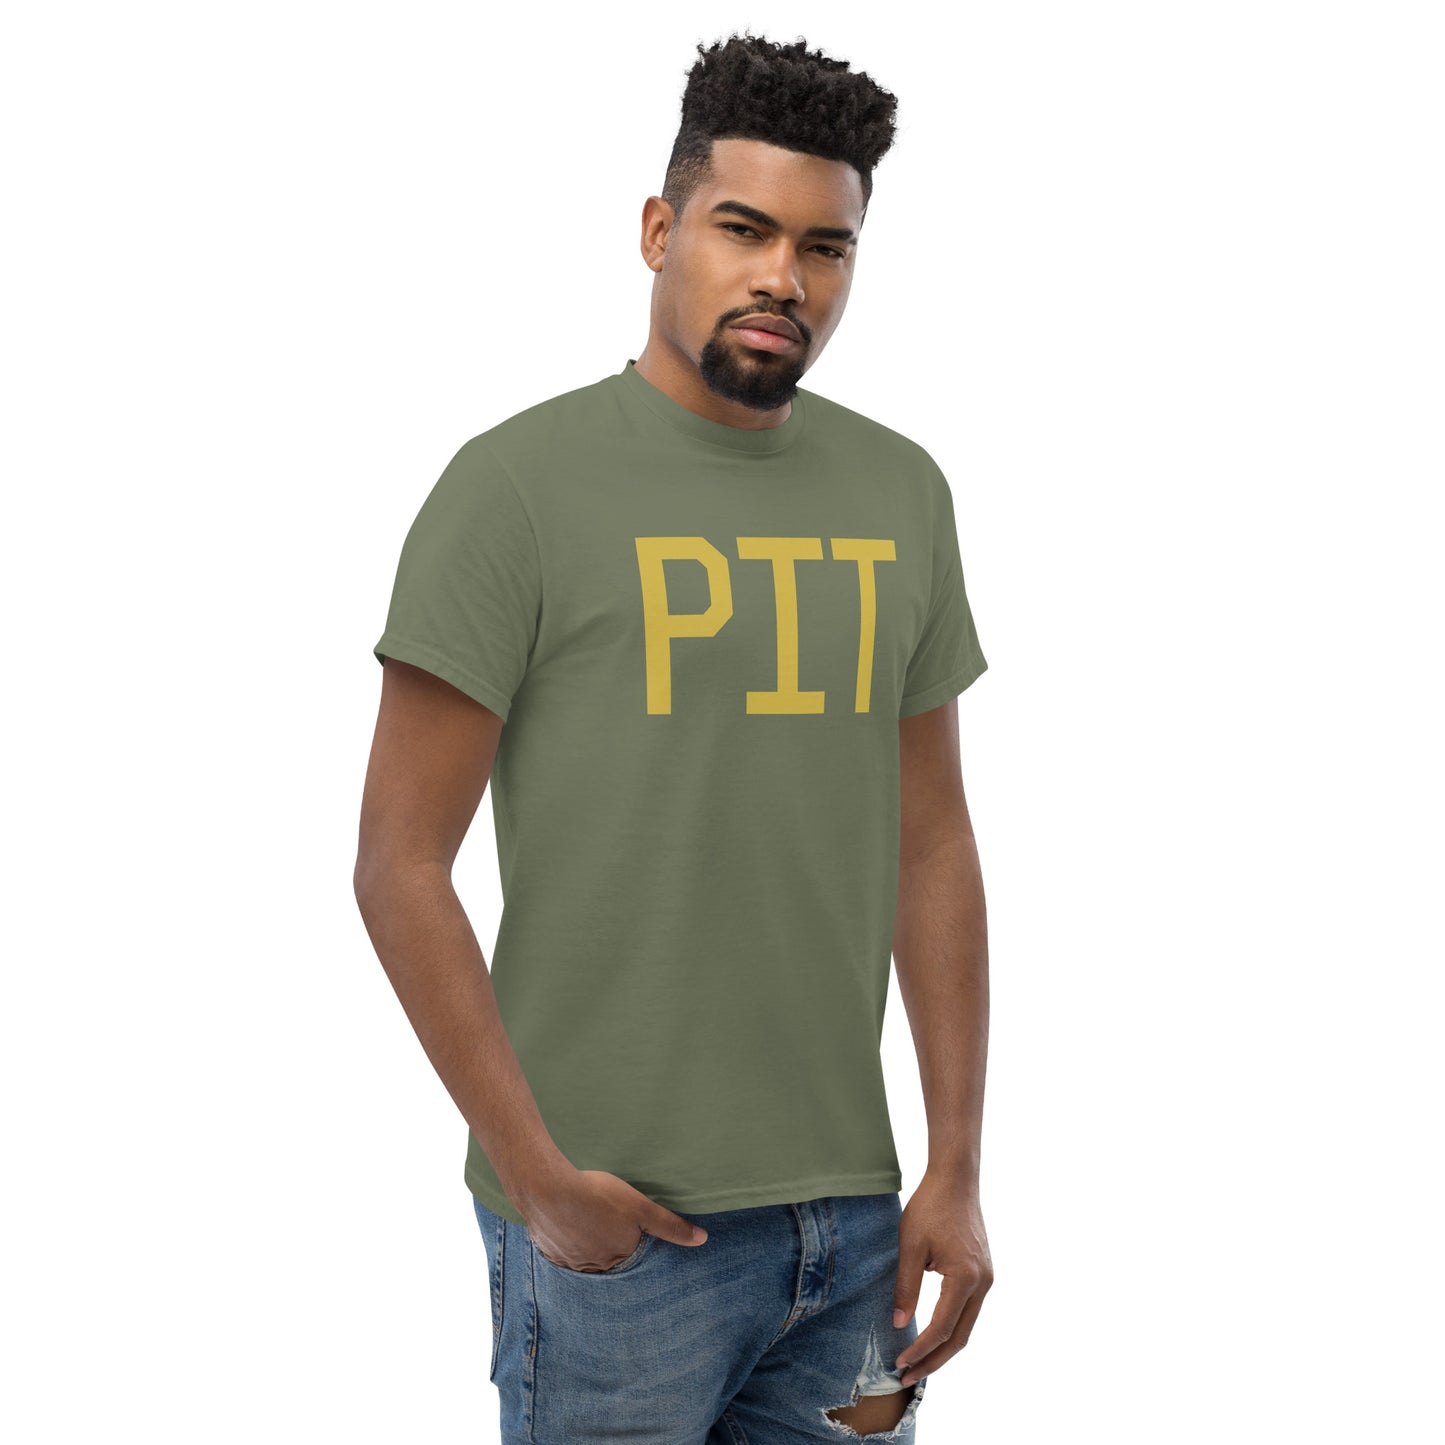 Aviation Enthusiast Men's Tee - Old Gold Graphic • PIT Pittsburgh • YHM Designs - Image 08